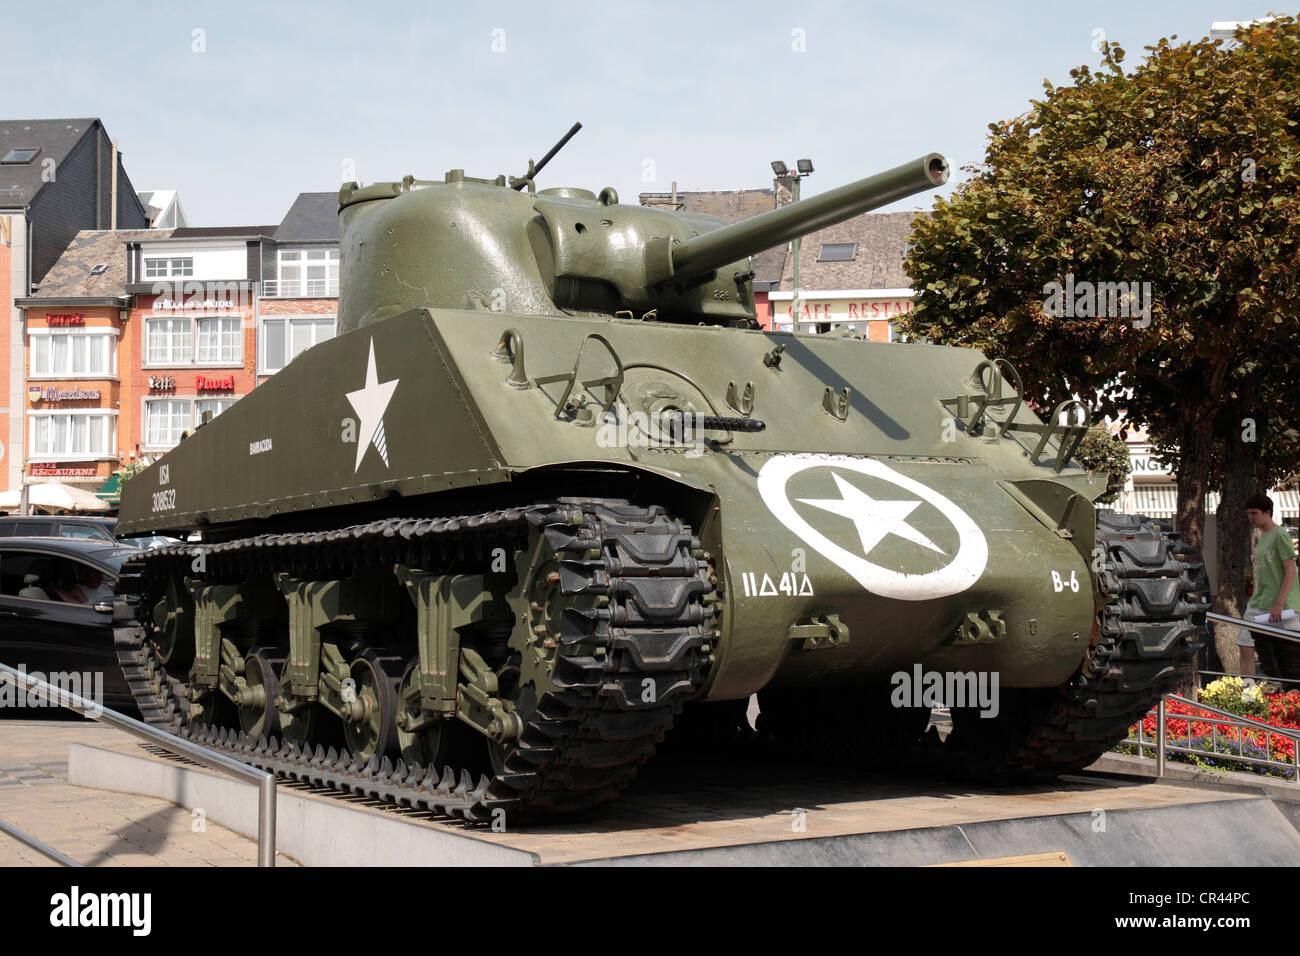 An American World War Two Sherman tank on display in the main town square in Bastogne,Walloon, Belgium. Stock Photo